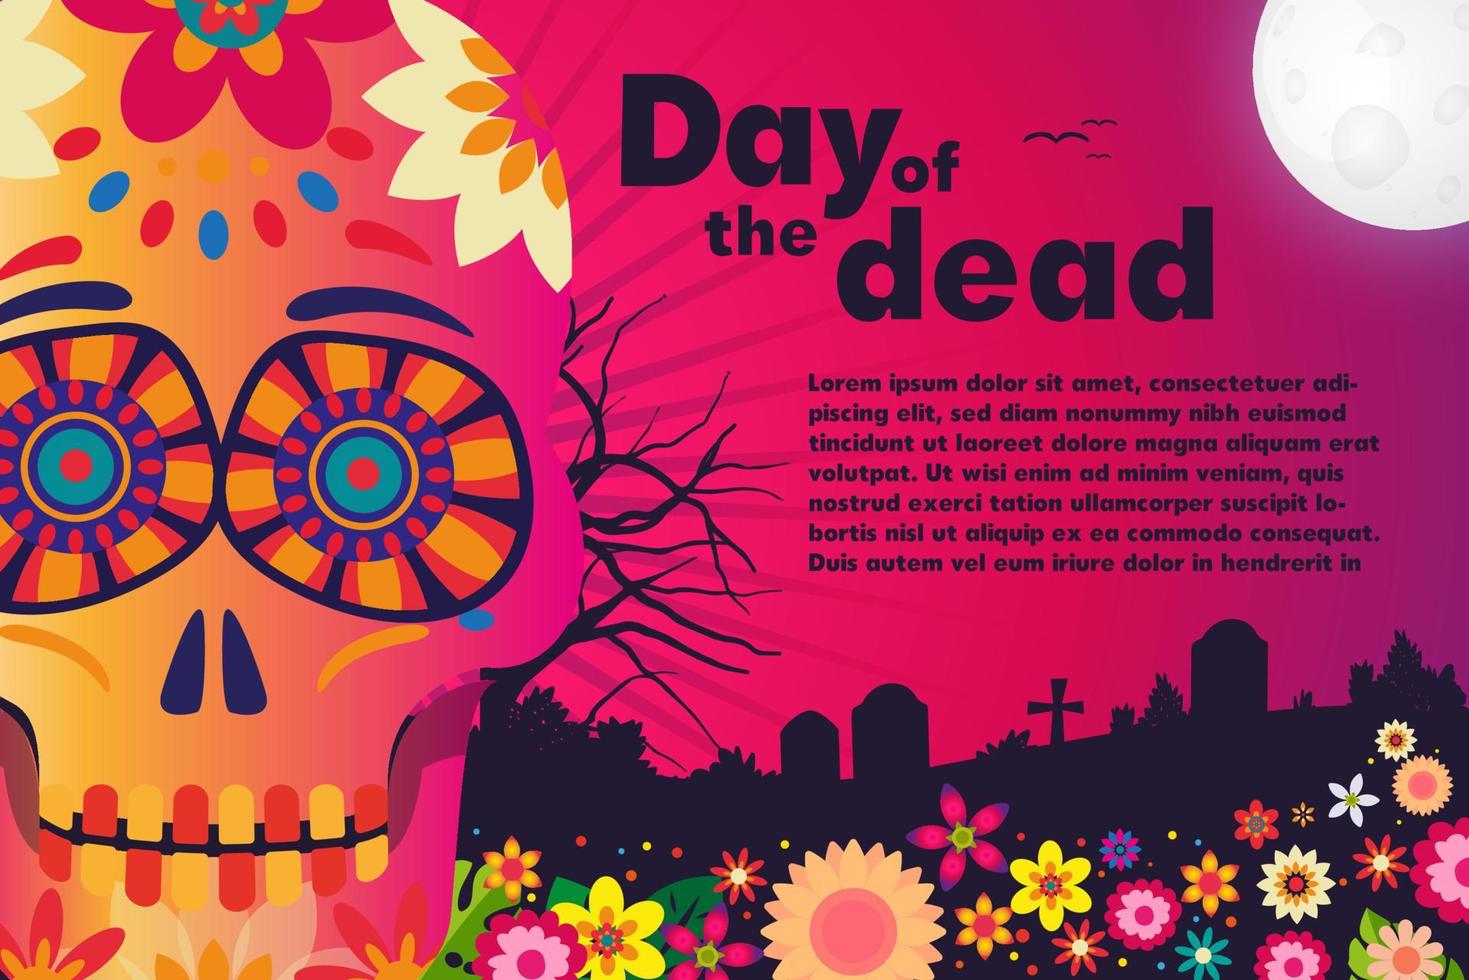 The day of the Dead. The Fiesta de Muertos are shown to cemeteries, tombs and altars adorned with candles, flowers, colorful skulls, bread and wine in honor of the ancestors. Design to use in the day vector